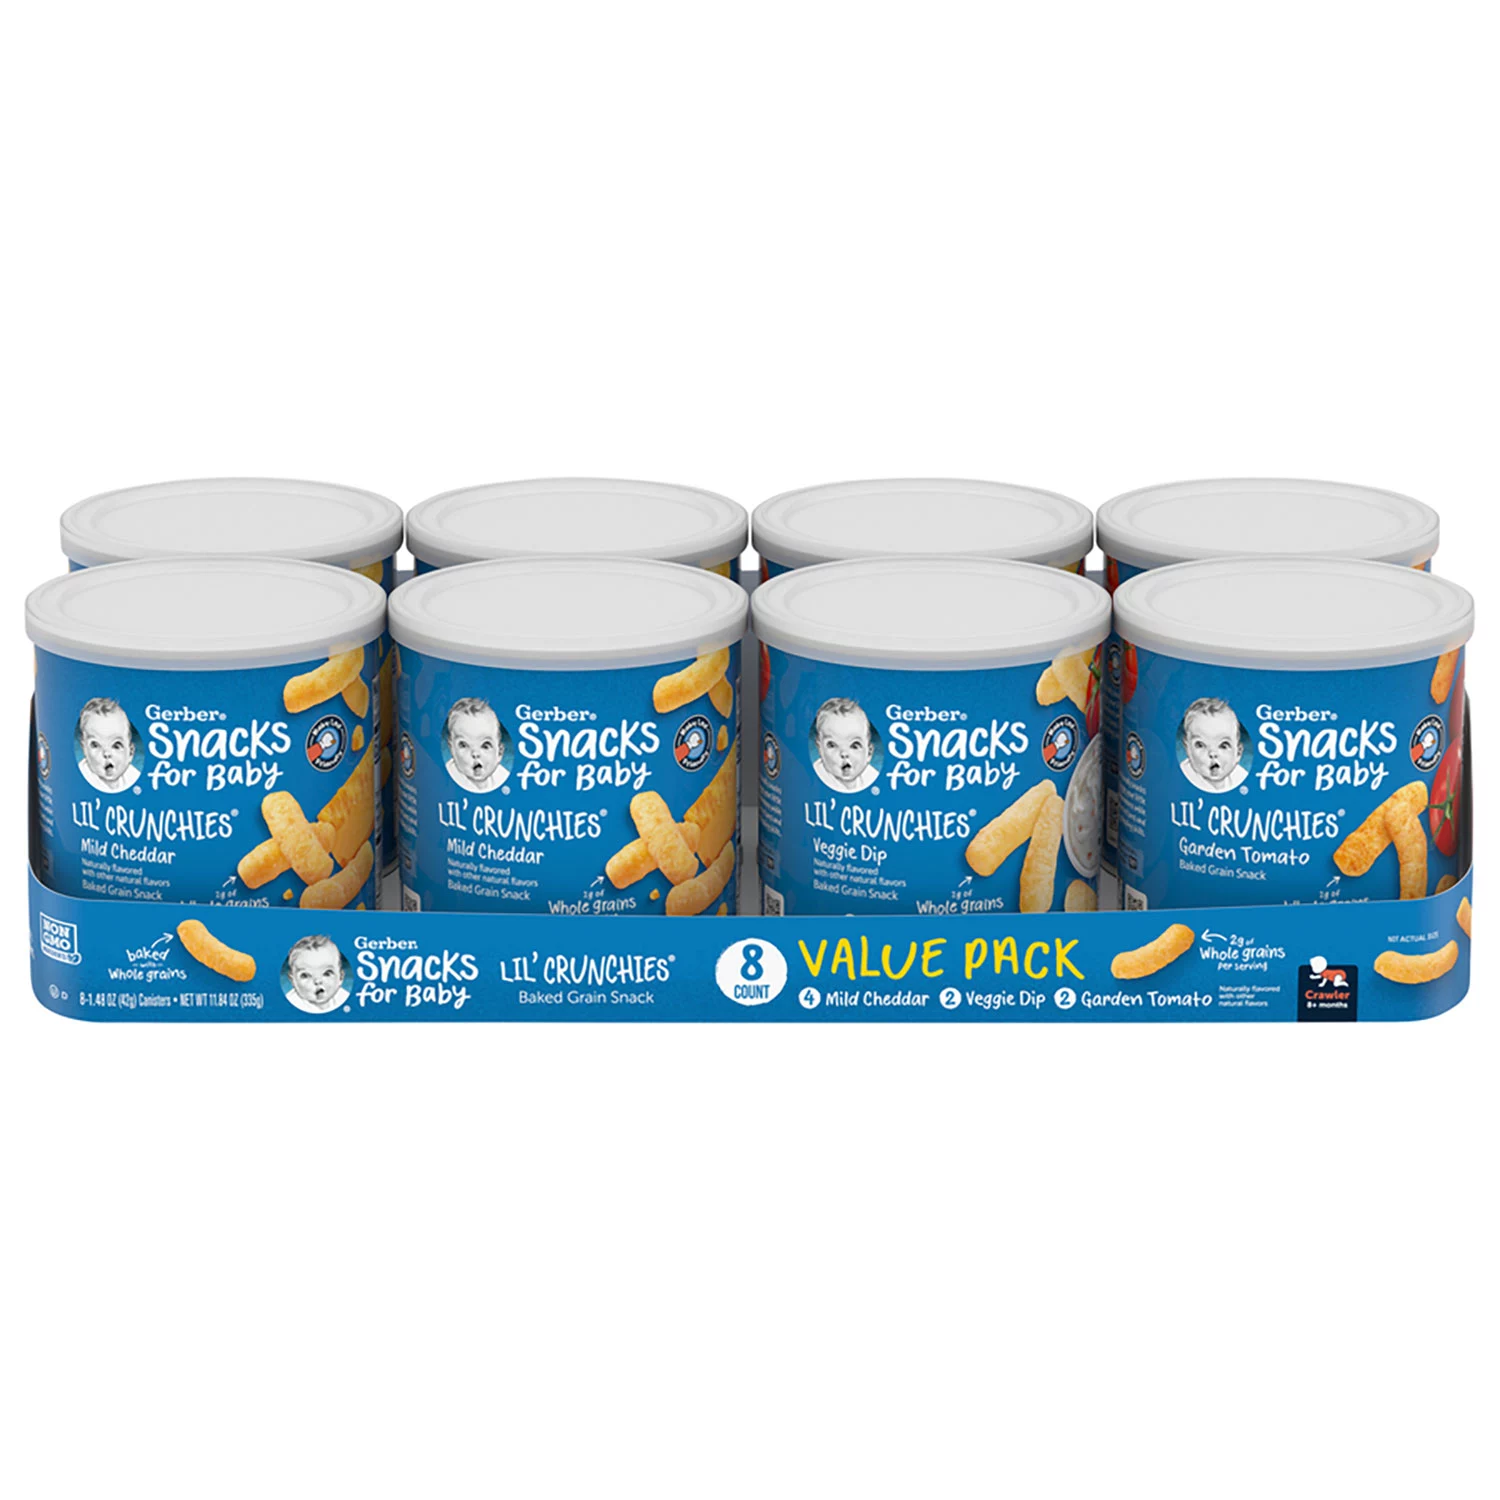 Gerber Lil’ Crunchies Baked Corn Snack Variety Pack (1.48 oz., 8 ct.)  